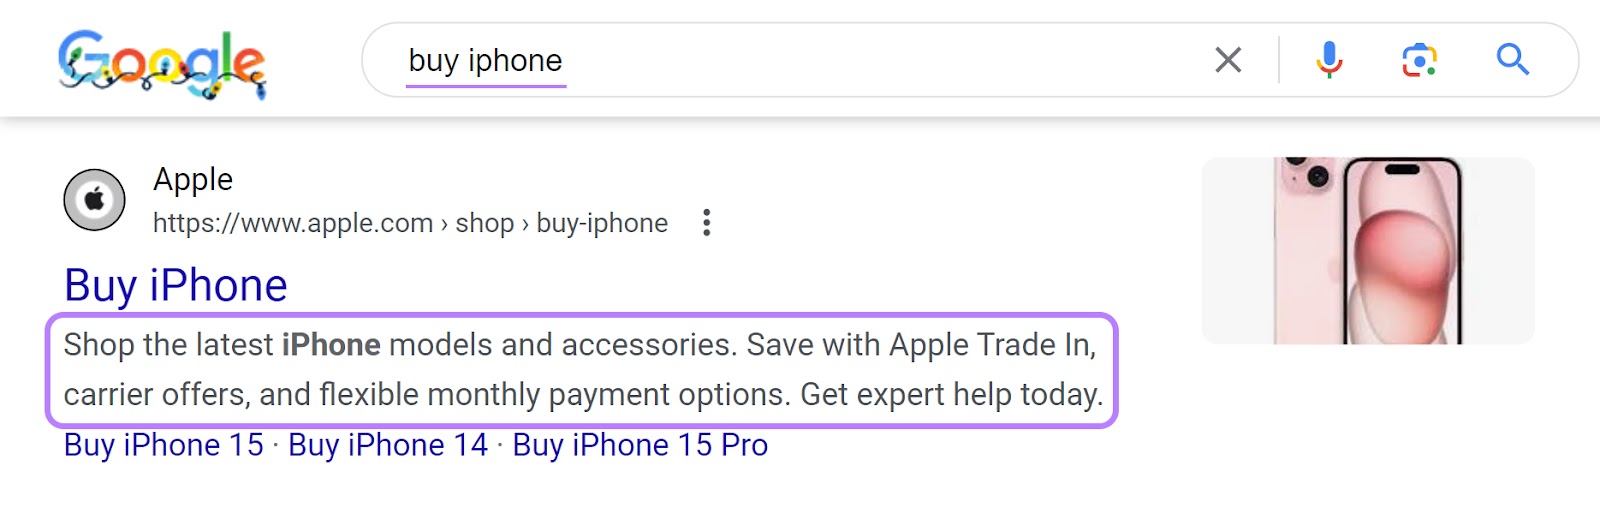 Apple's meta description for "Buy iPhone" page